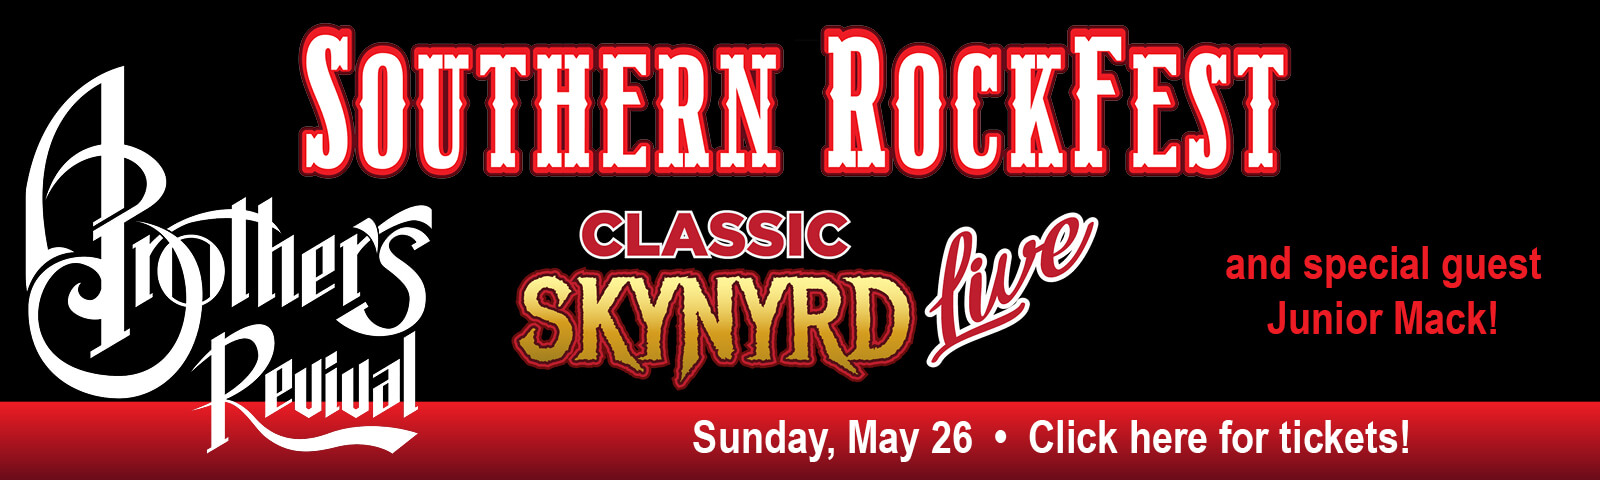 Southern RockFest: A Brother's Revival, Classic Skynyrd Live, and special guest Junior Mack! Sunday, May 26. Click here for tickets!